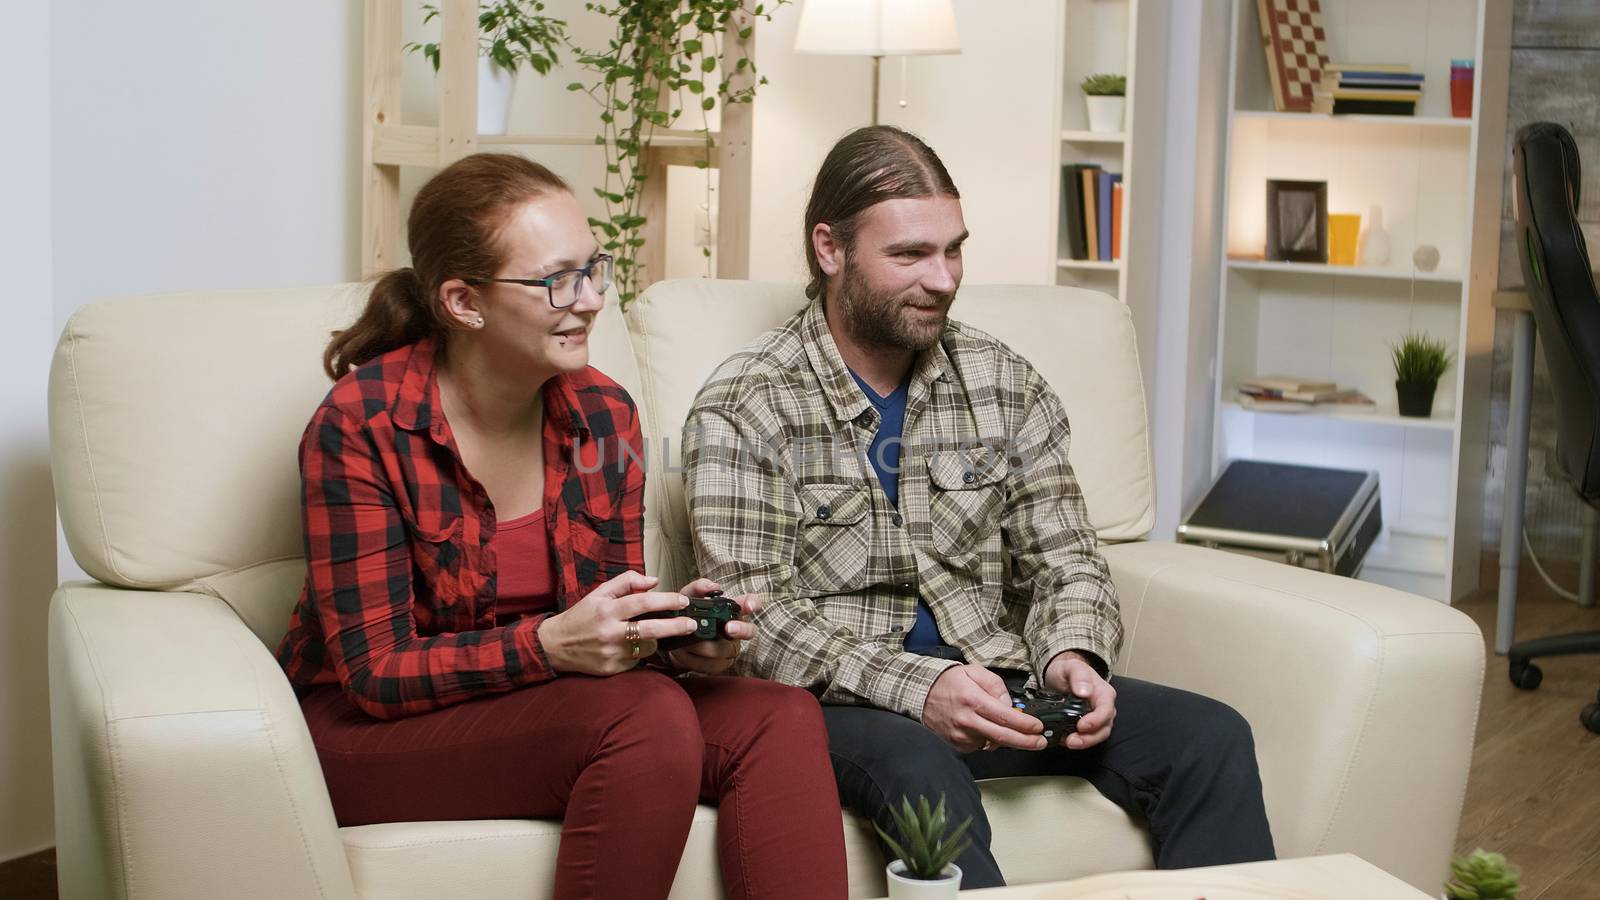 Husband and wife sitting on sofa playing video games by DCStudio